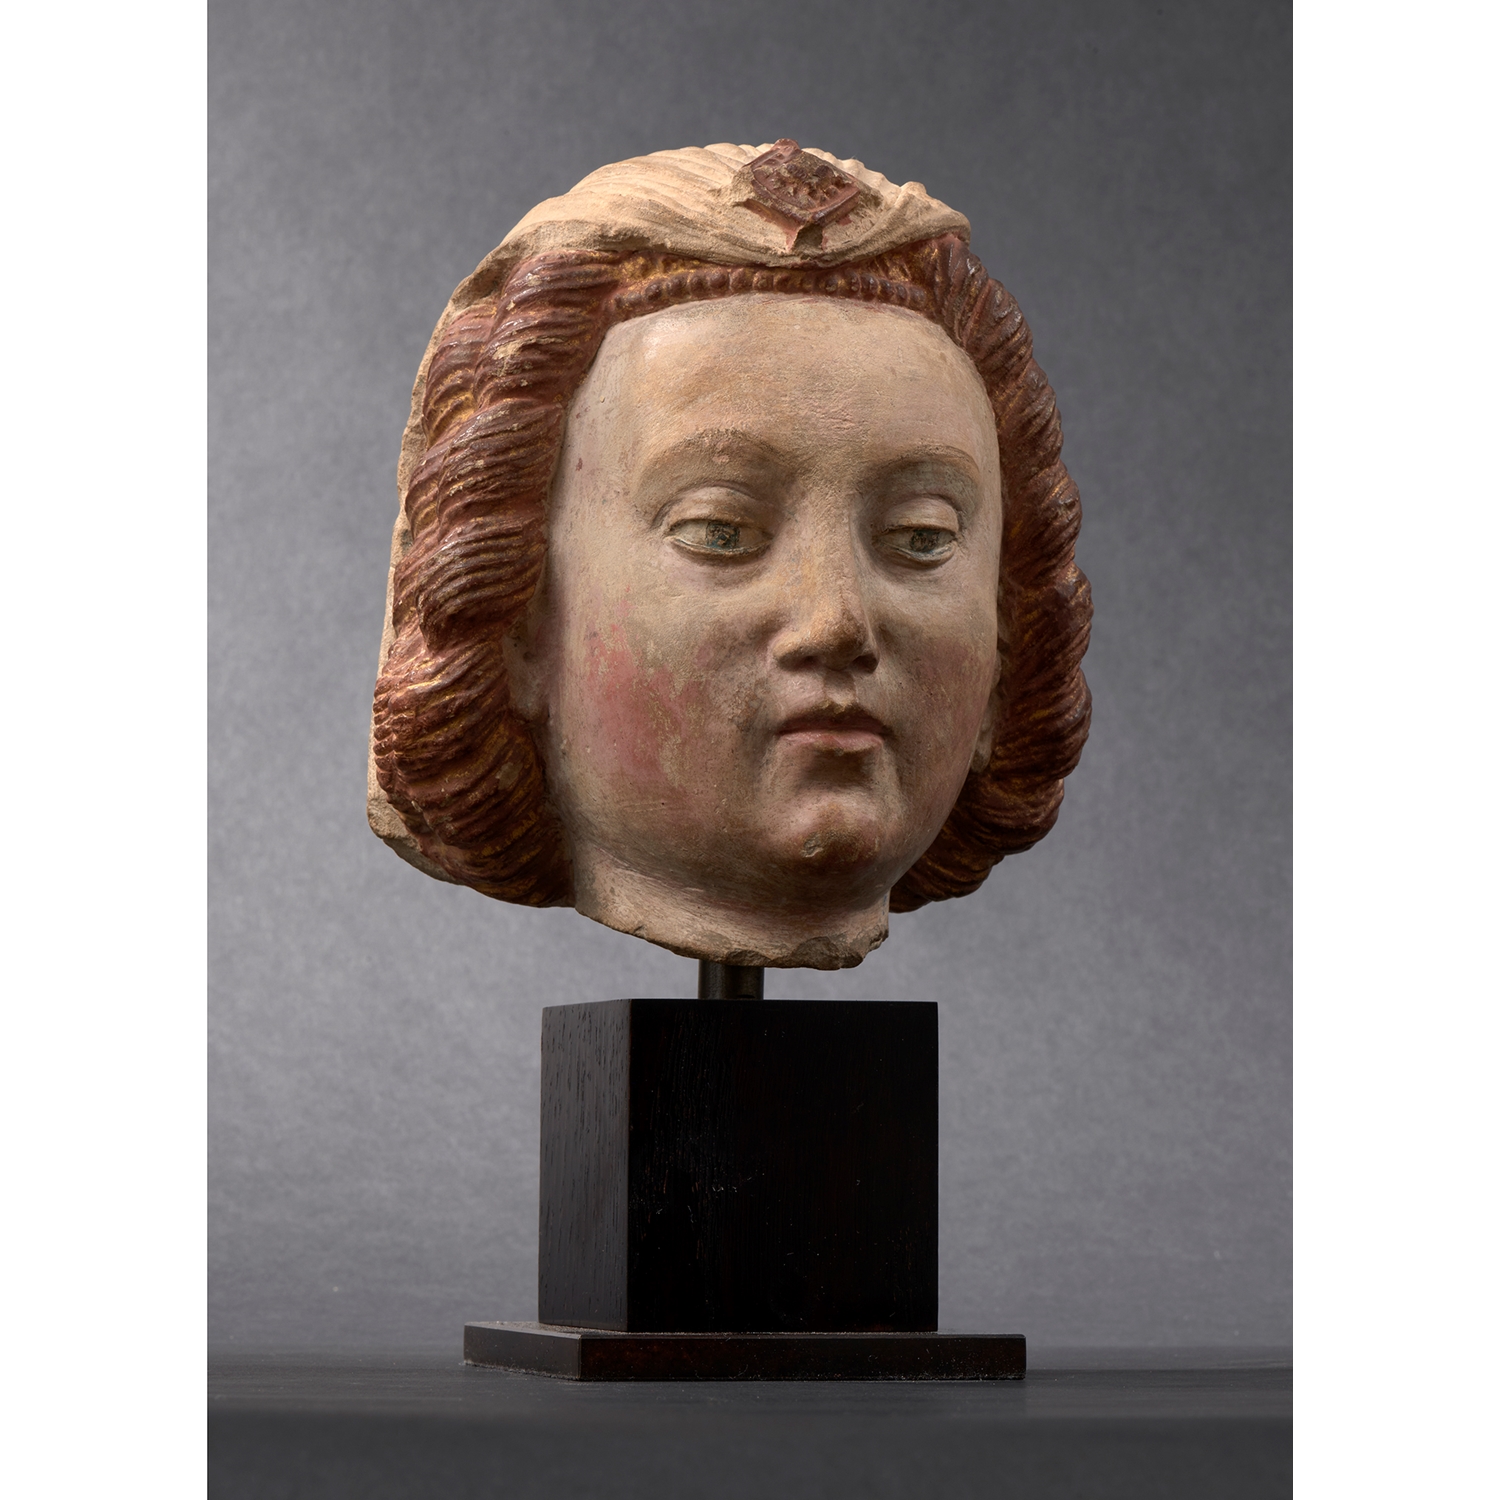 HEAD OF A WOMAN NORMANDY EARLY 16TH CENTURY